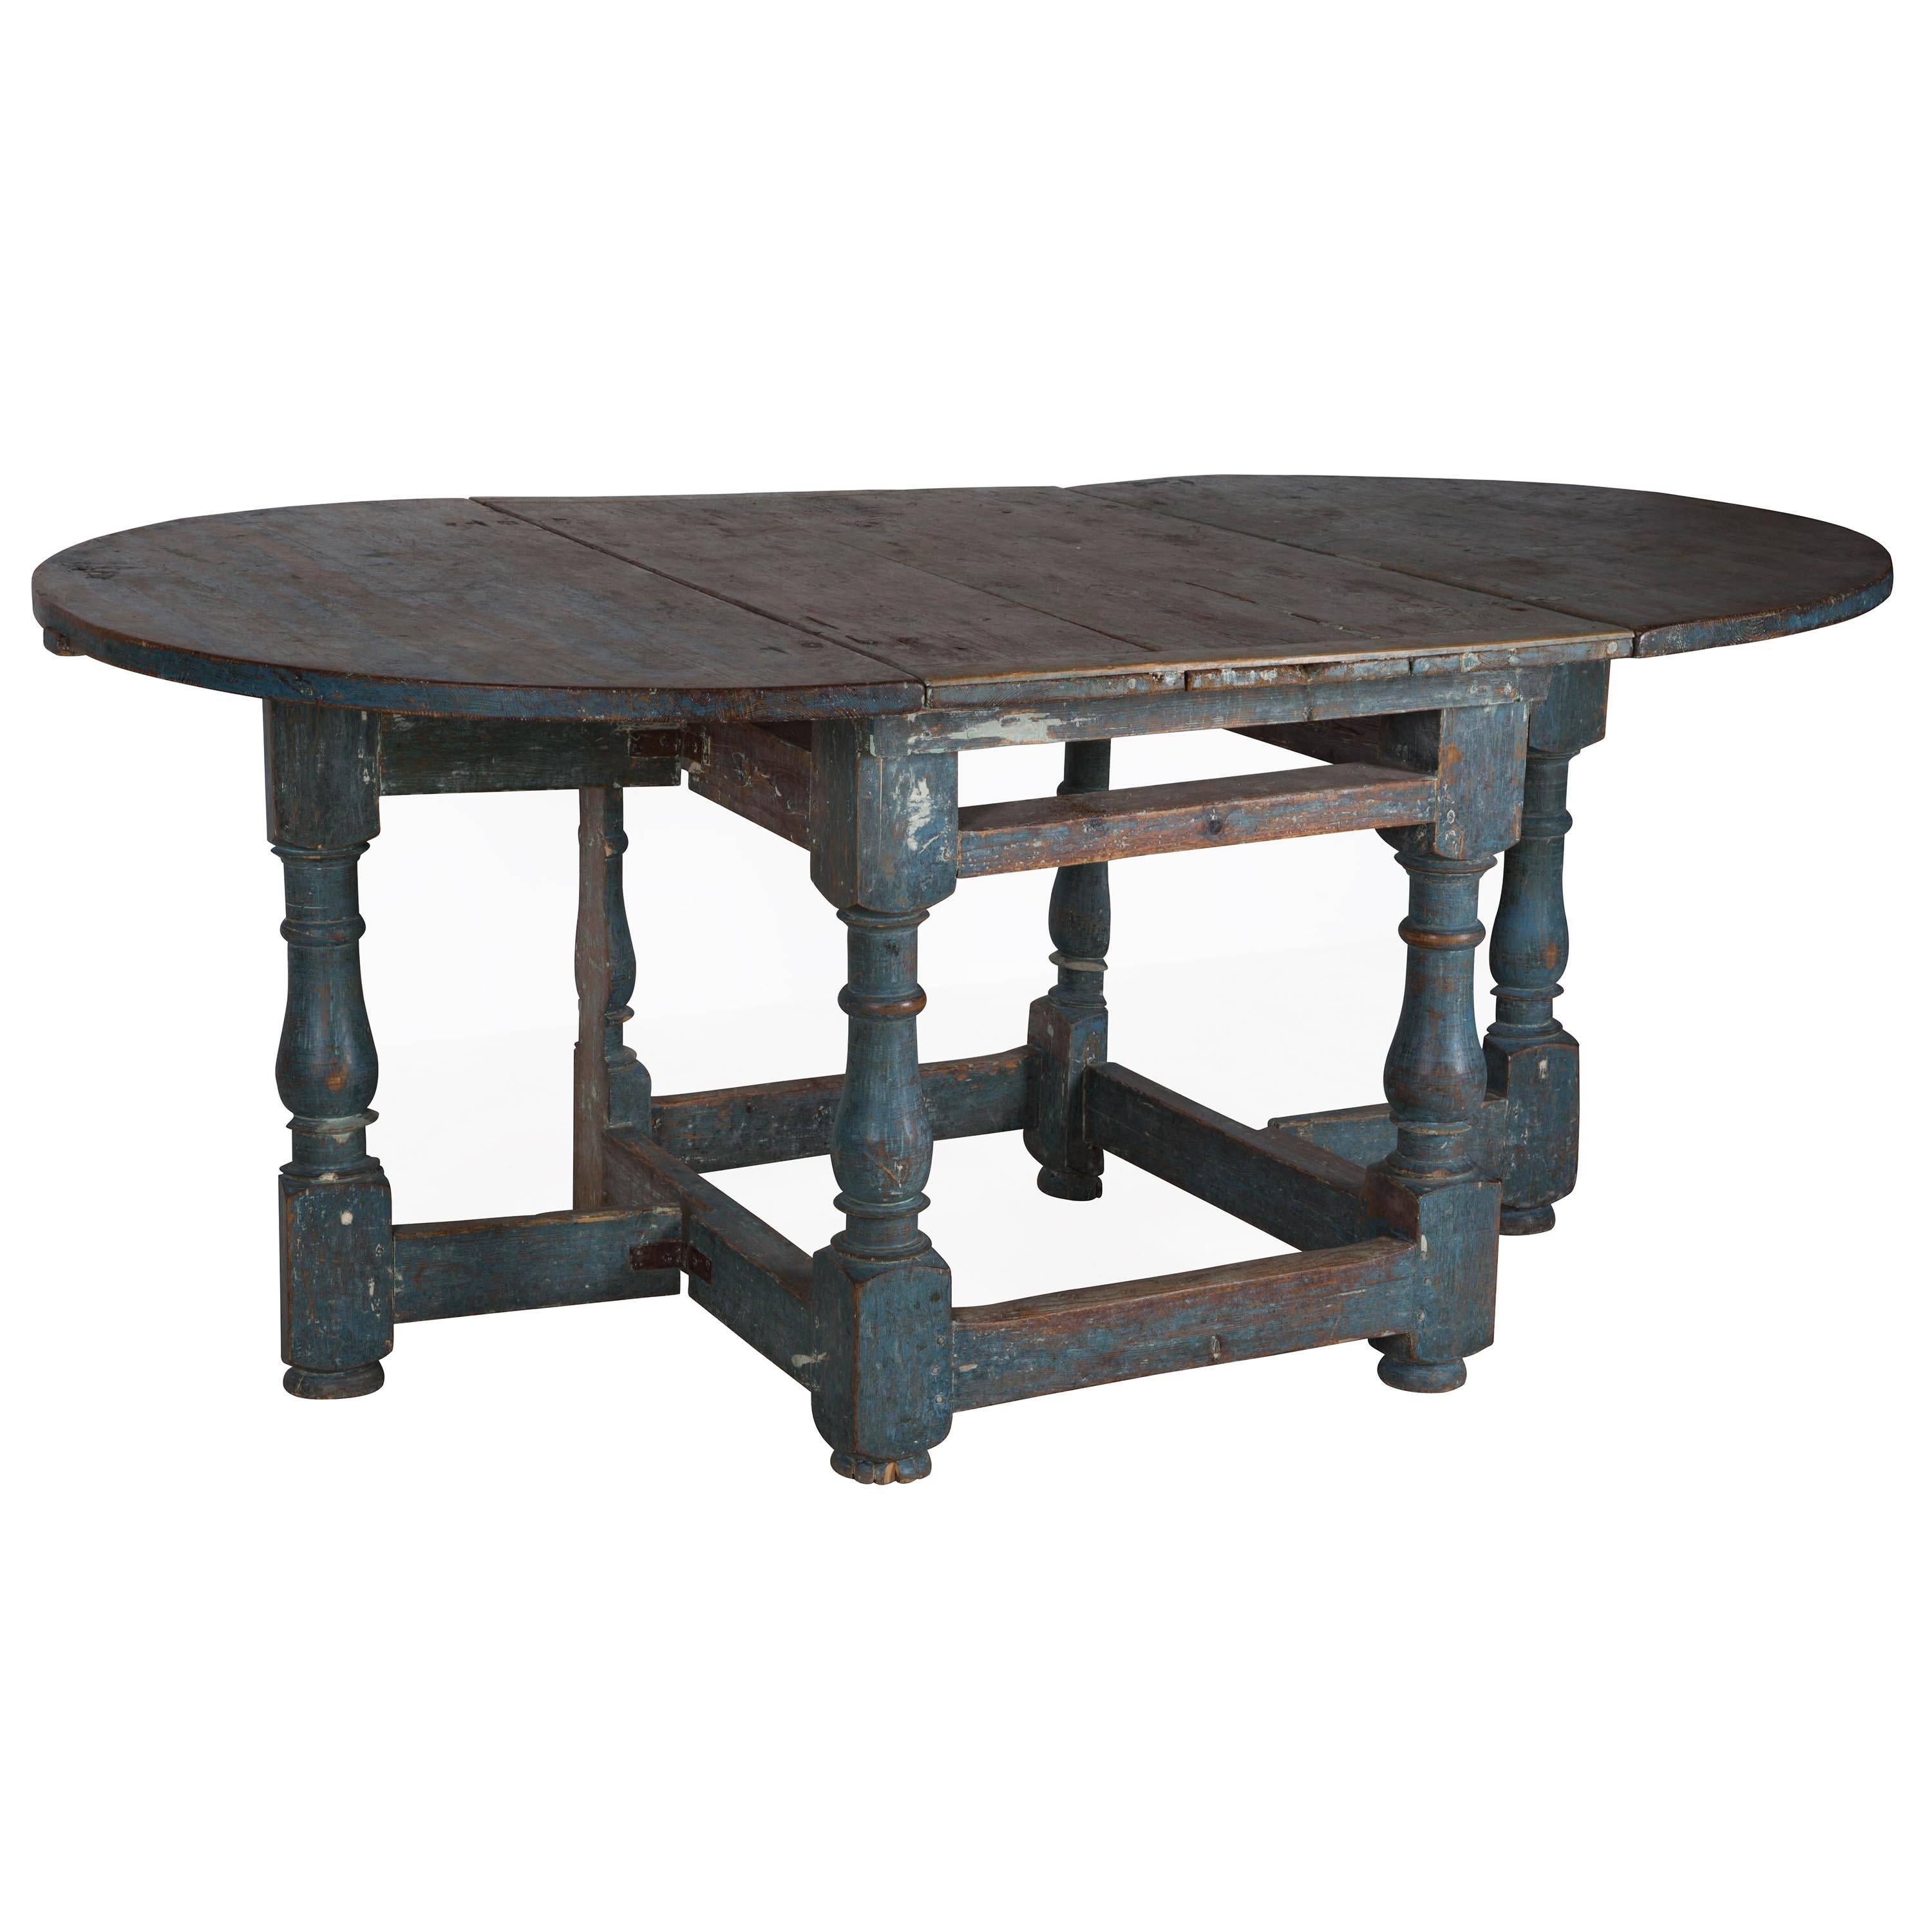 An 18th century Swedish Provincial drop-leaf dining or center table in traces of original paint (refreshed).